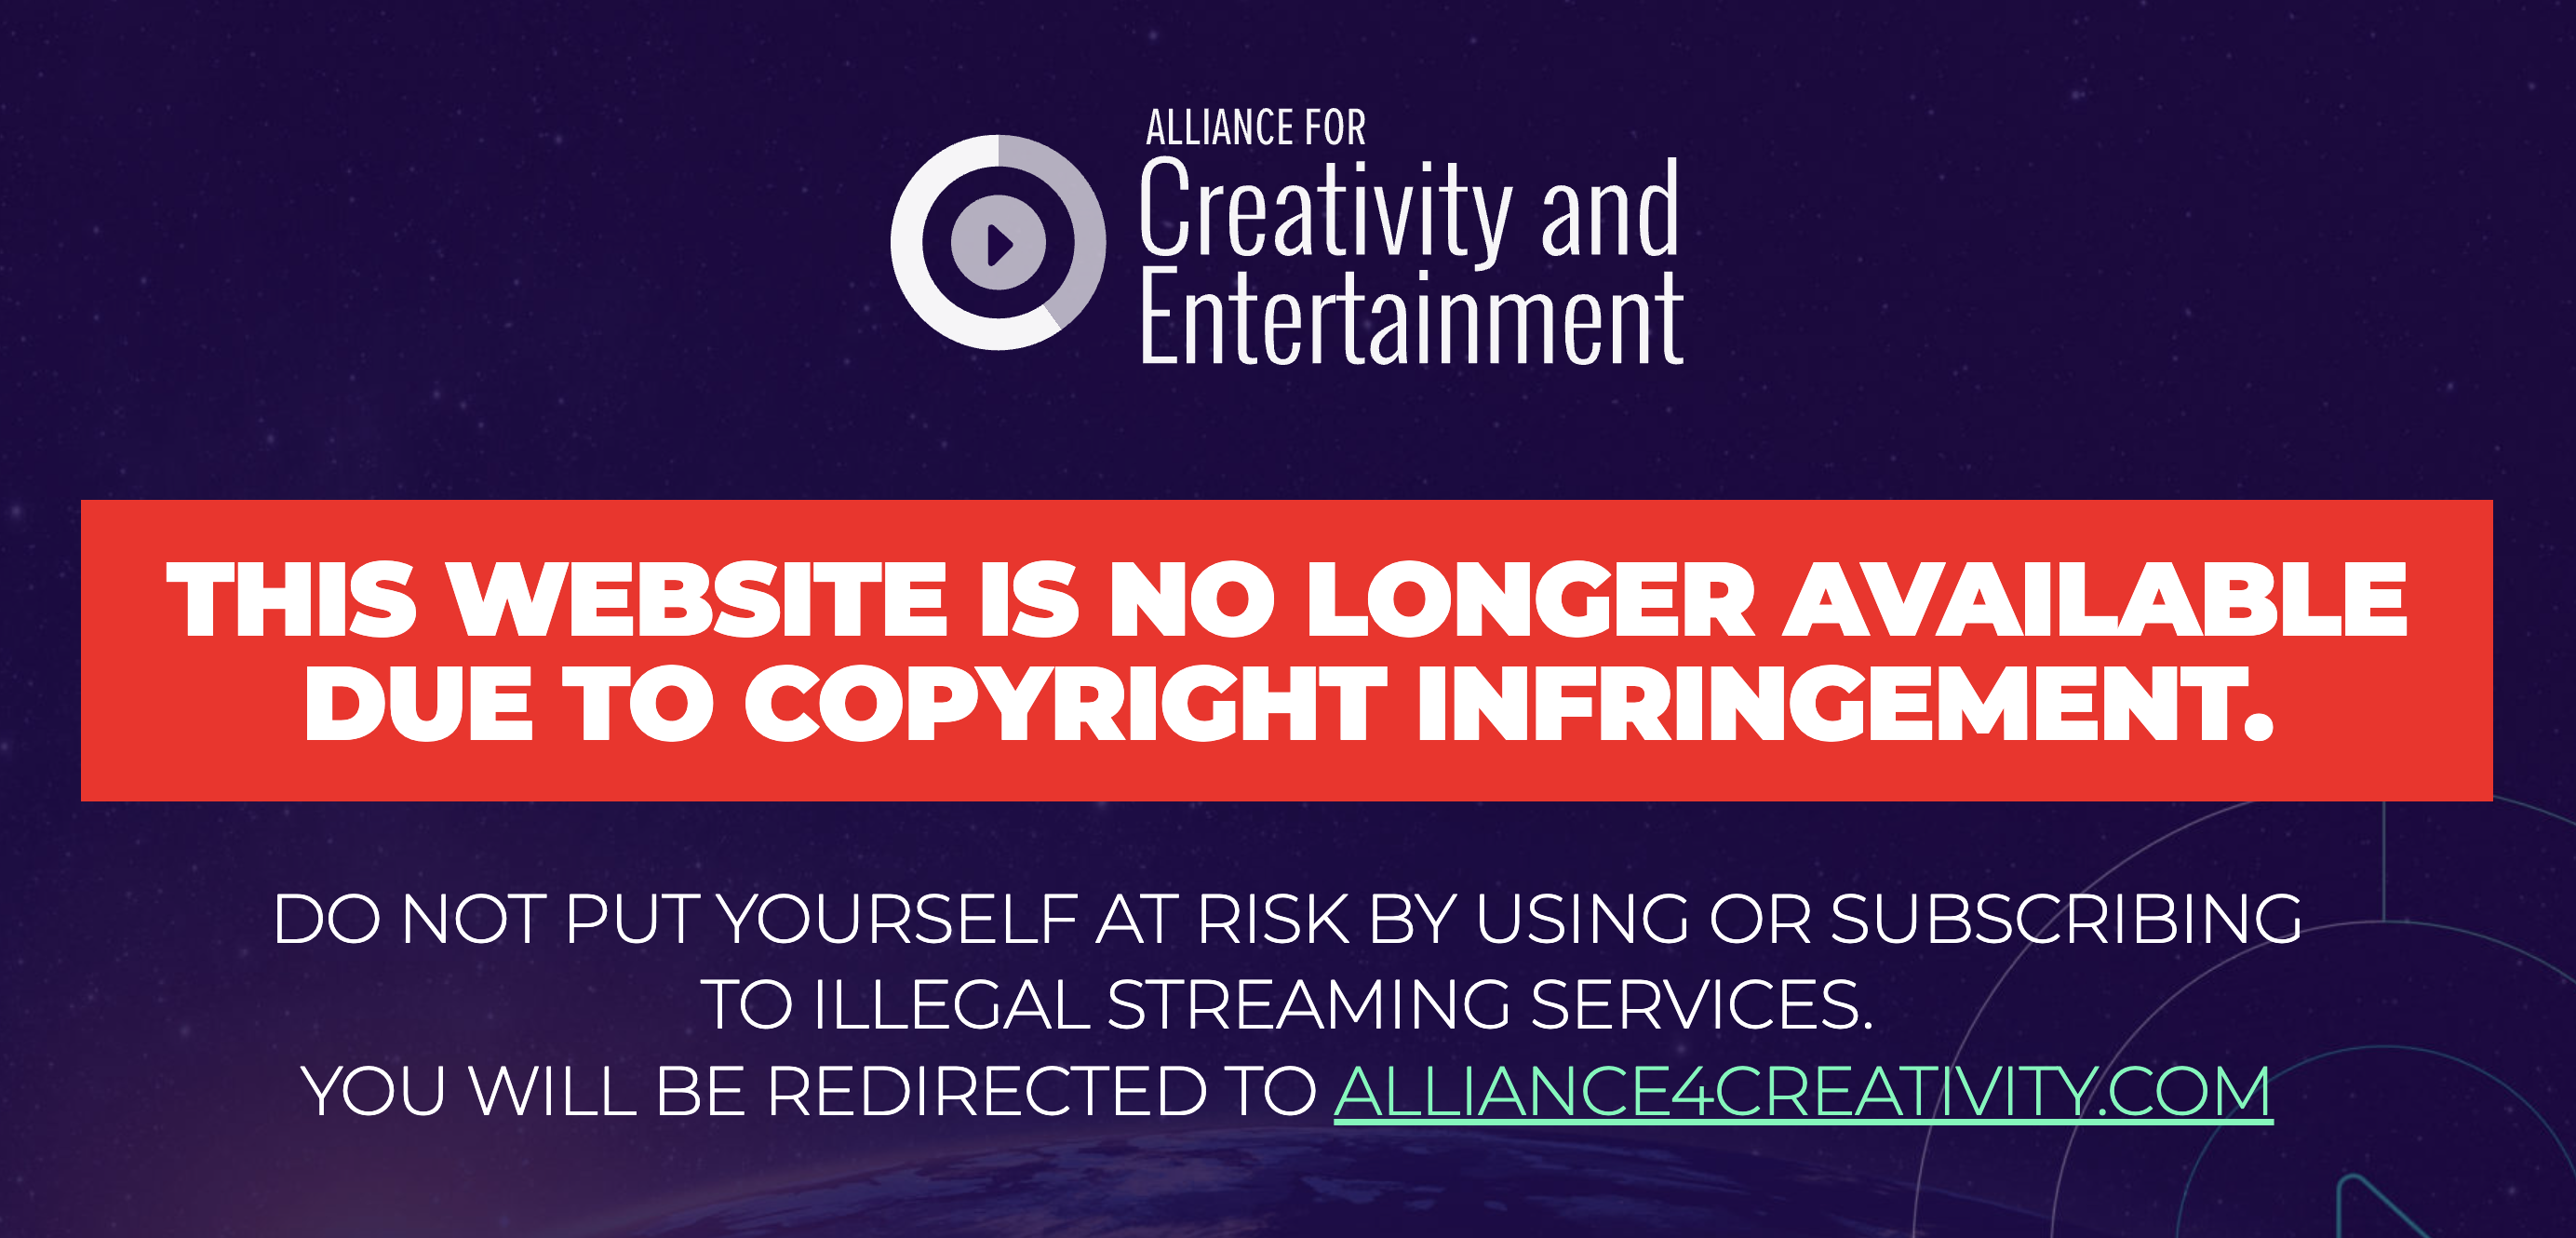 The Alliance for Creativity and Entertainment (ACE) is a global anti-piracy organization that is responsible for shutting down hundreds of pirate streaming sites.